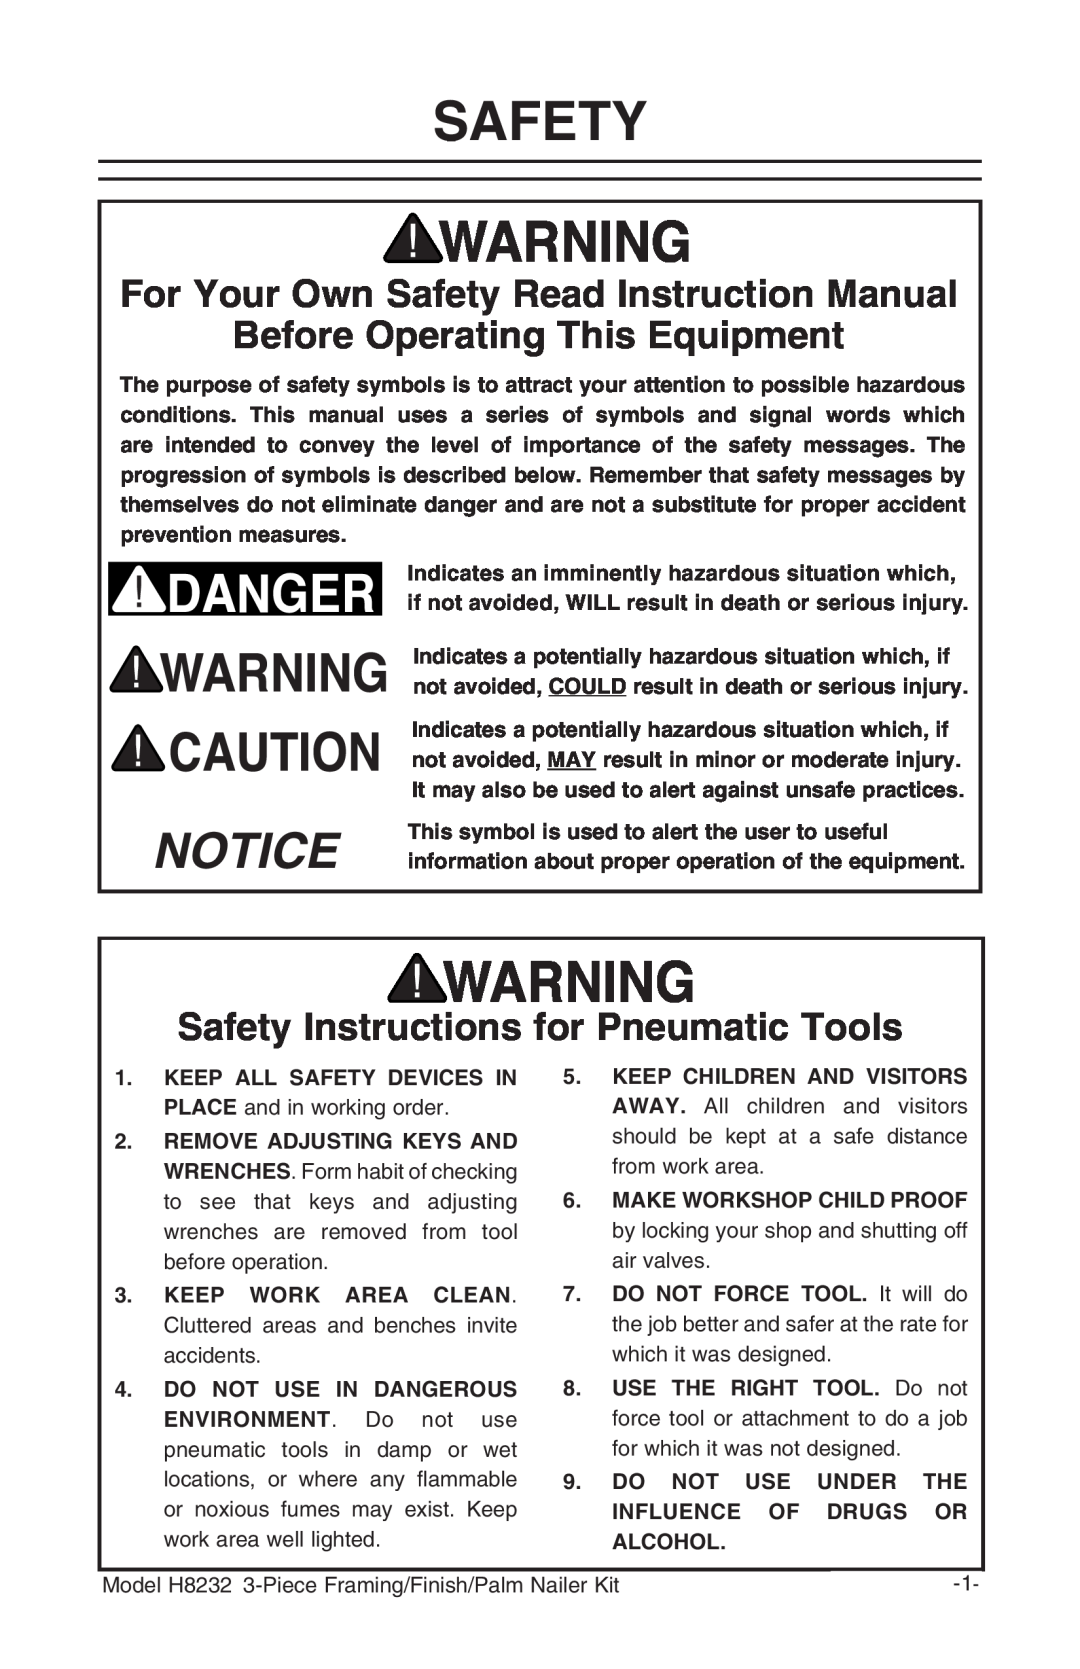 Grizzly H8232 owner manual For Your Own Safety Read Instruction Manual, Before Operating This Equipment 